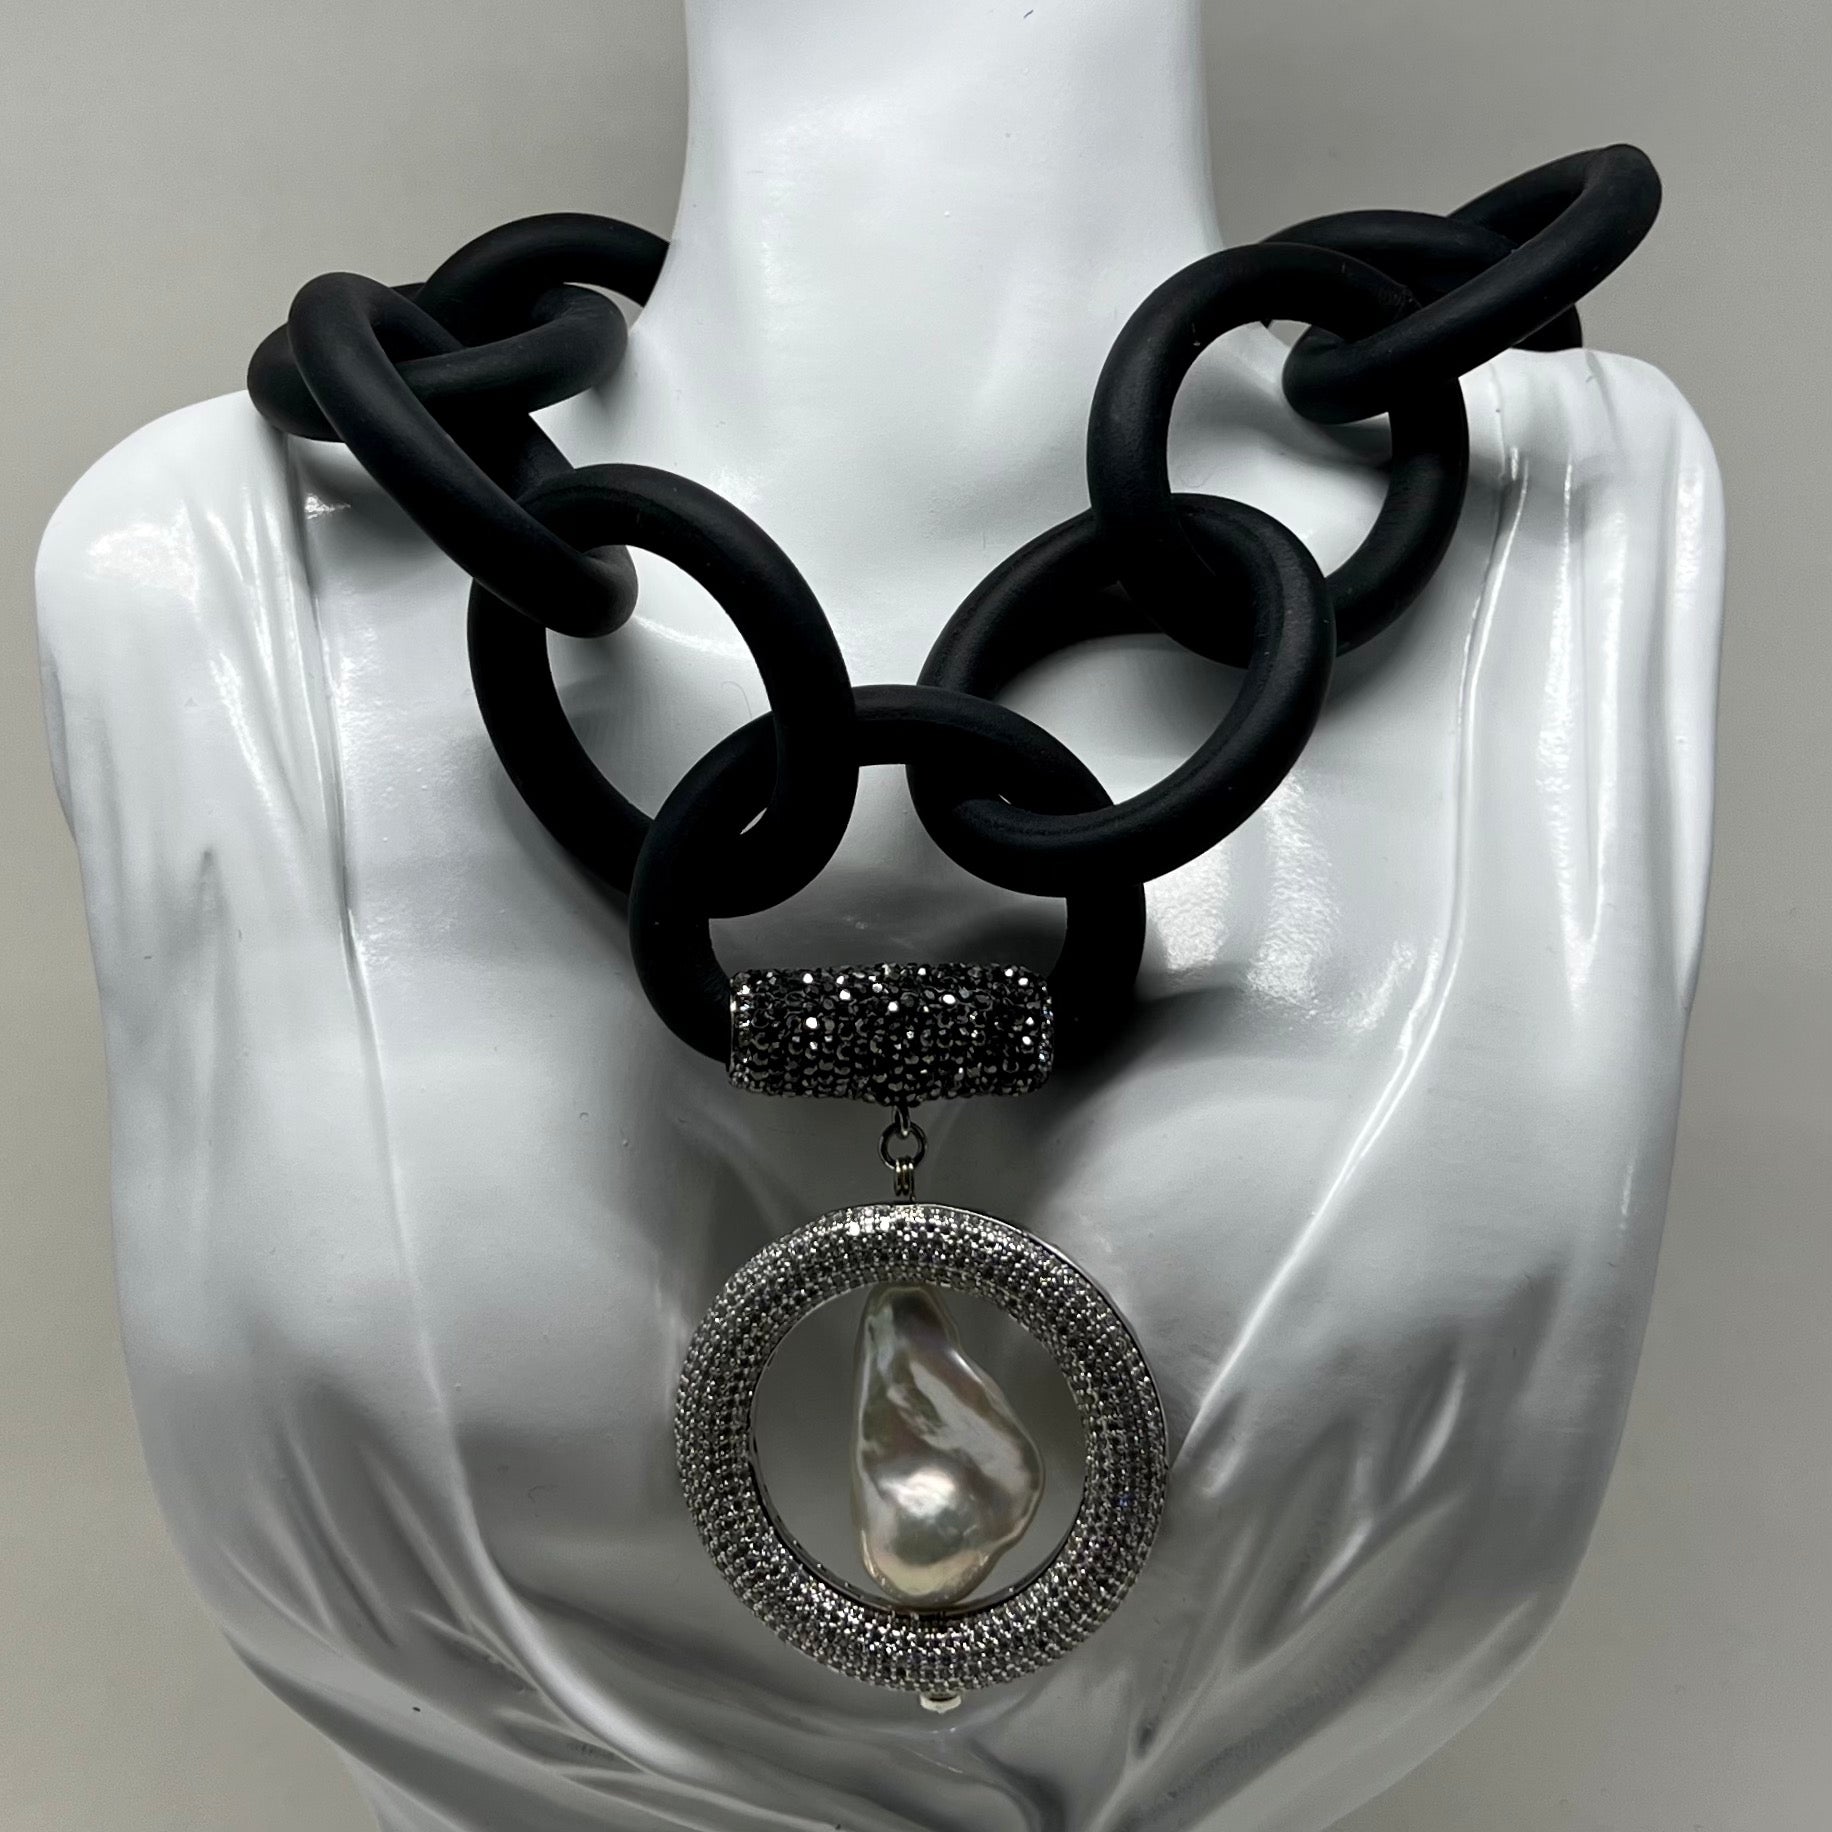 BLACK RUBBER NECKLACE WITH GENUINE LARGE BAROQUE PEARL SET INSIDE A PAVE'S CZ CIRCLE PENDENT. by nyet jewelry